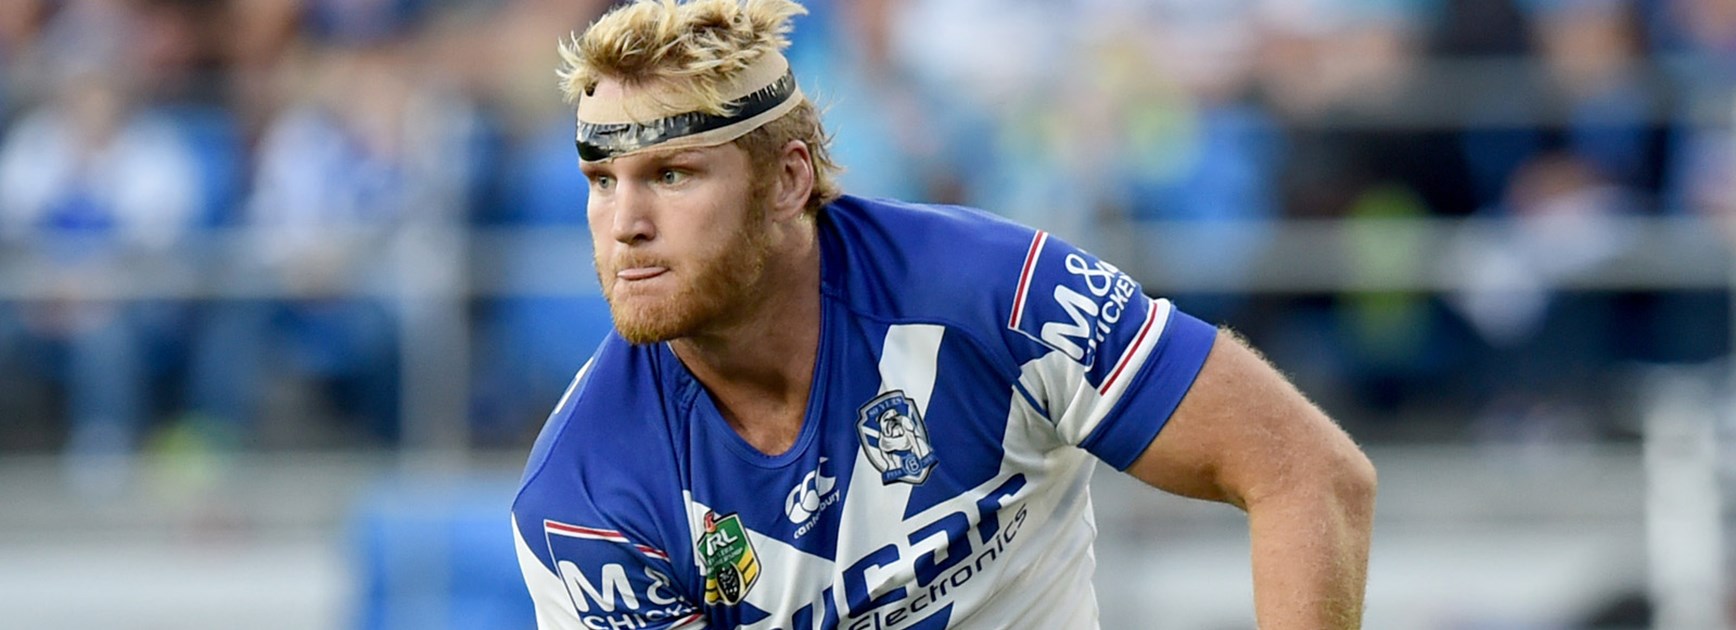 Bulldogs prop Aiden Tolman was again immense for his side against the Titans.